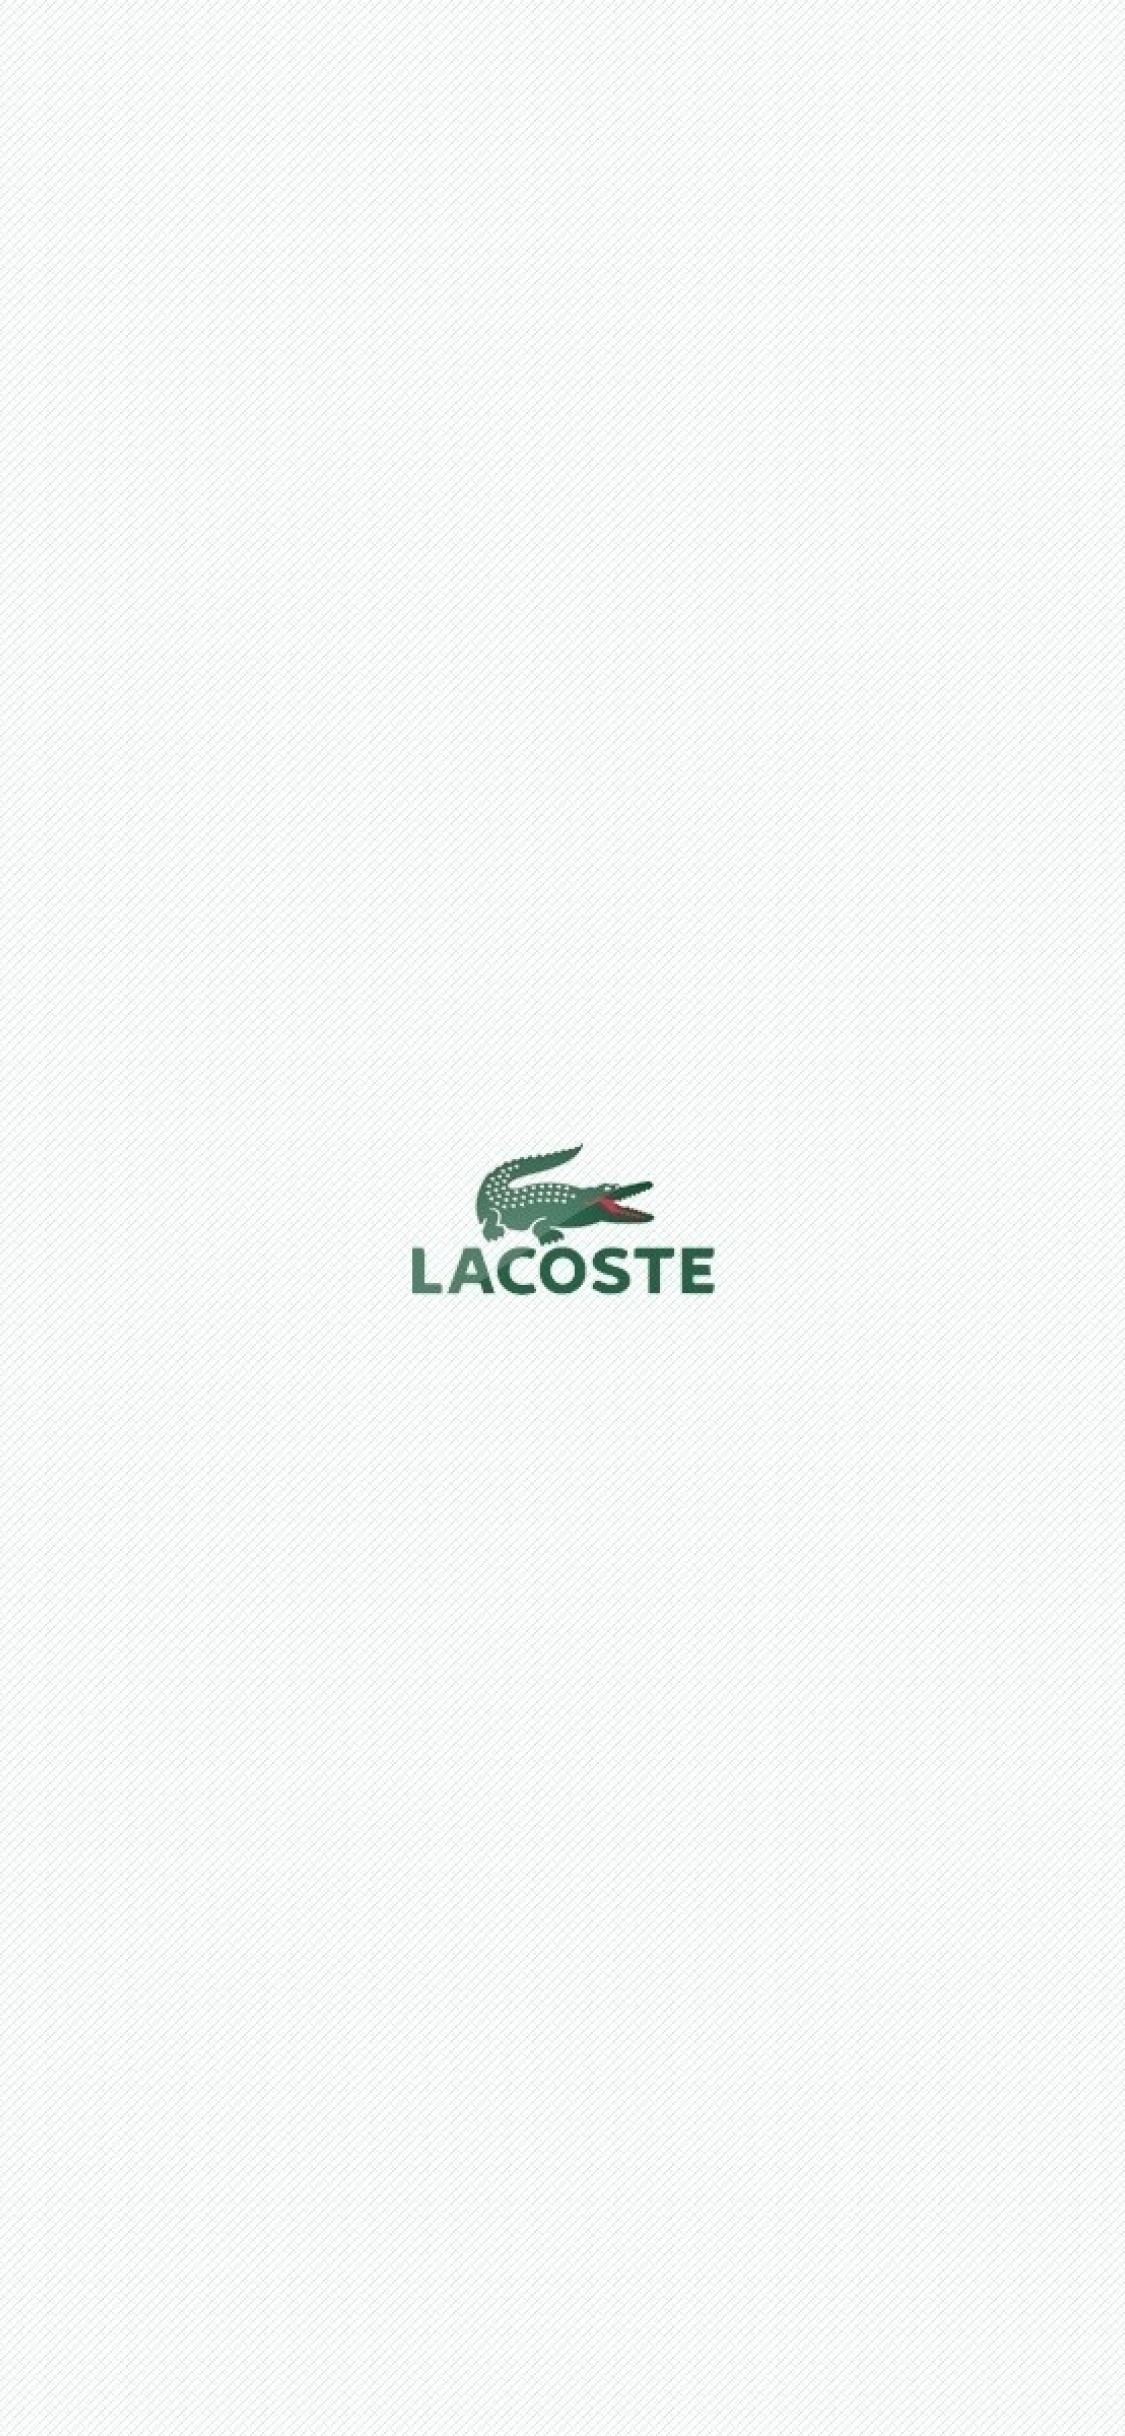 1125x2436 Lacoste Crocodile Logo Iphone Xs Iphone 10 Iphone X Wallpaper Hd Brands 4k Wallpapers Images Photos And Background Wallpapers Den